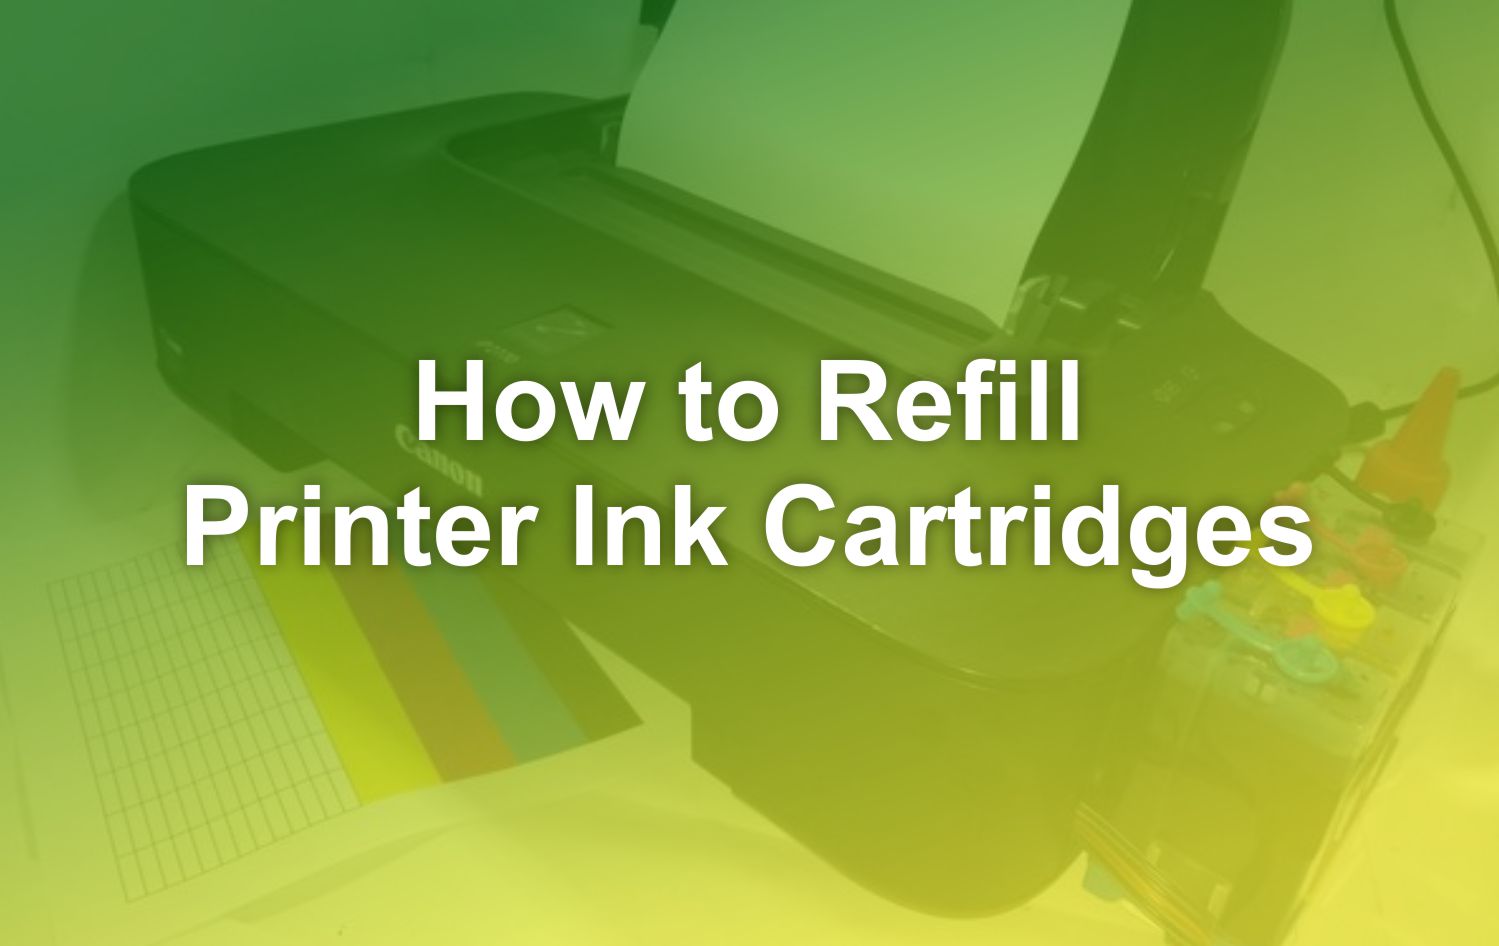 How to Refill Printer Ink Cartridges